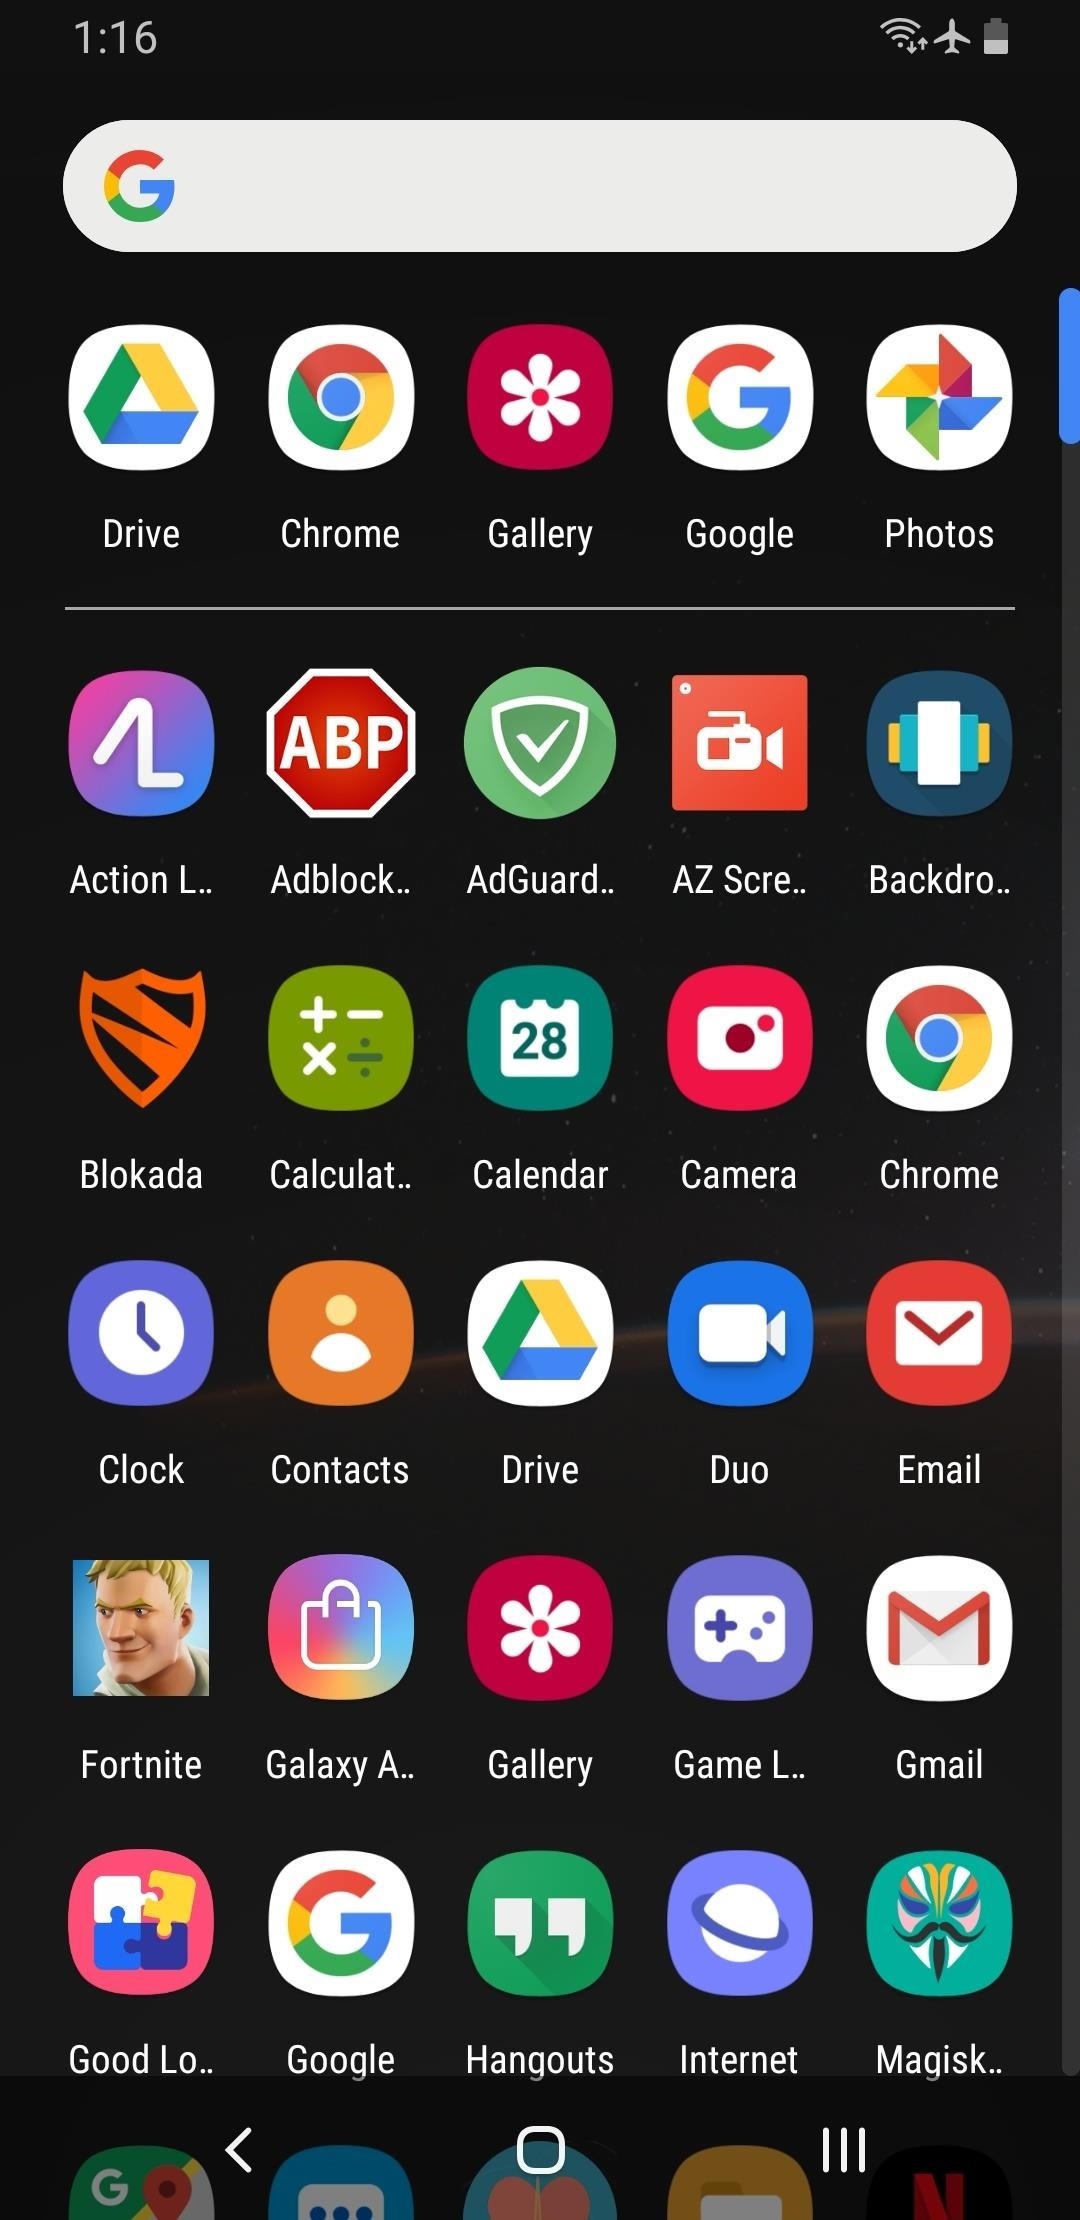 How to Enable Dark Mode in the Google Feed on Android